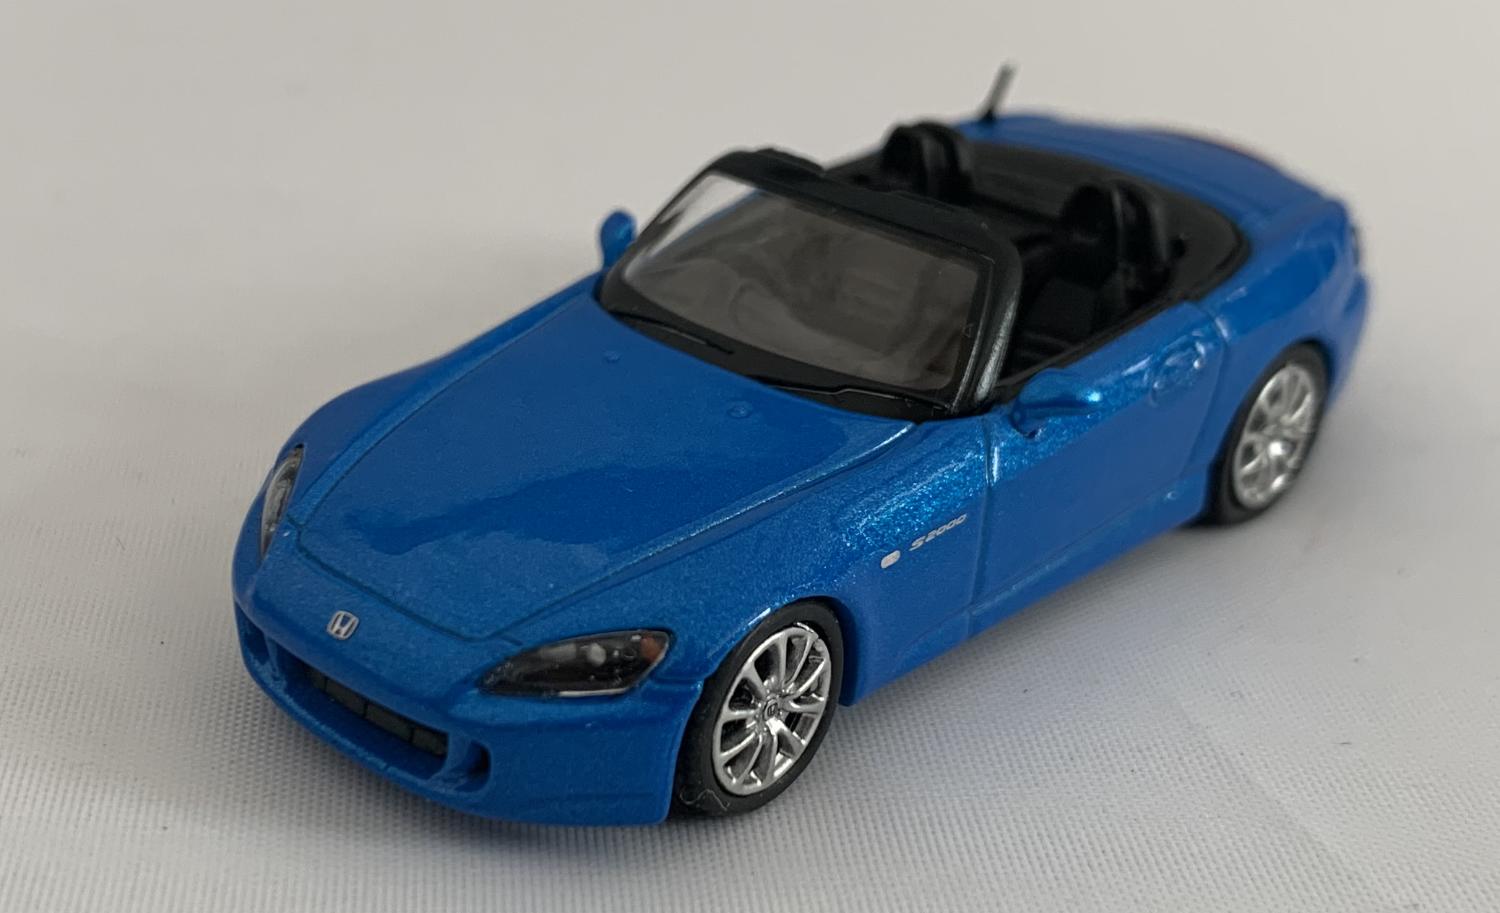 An excellent scale model of a Honda S2000 decorated in Bermuda blue pearl with silver wheels